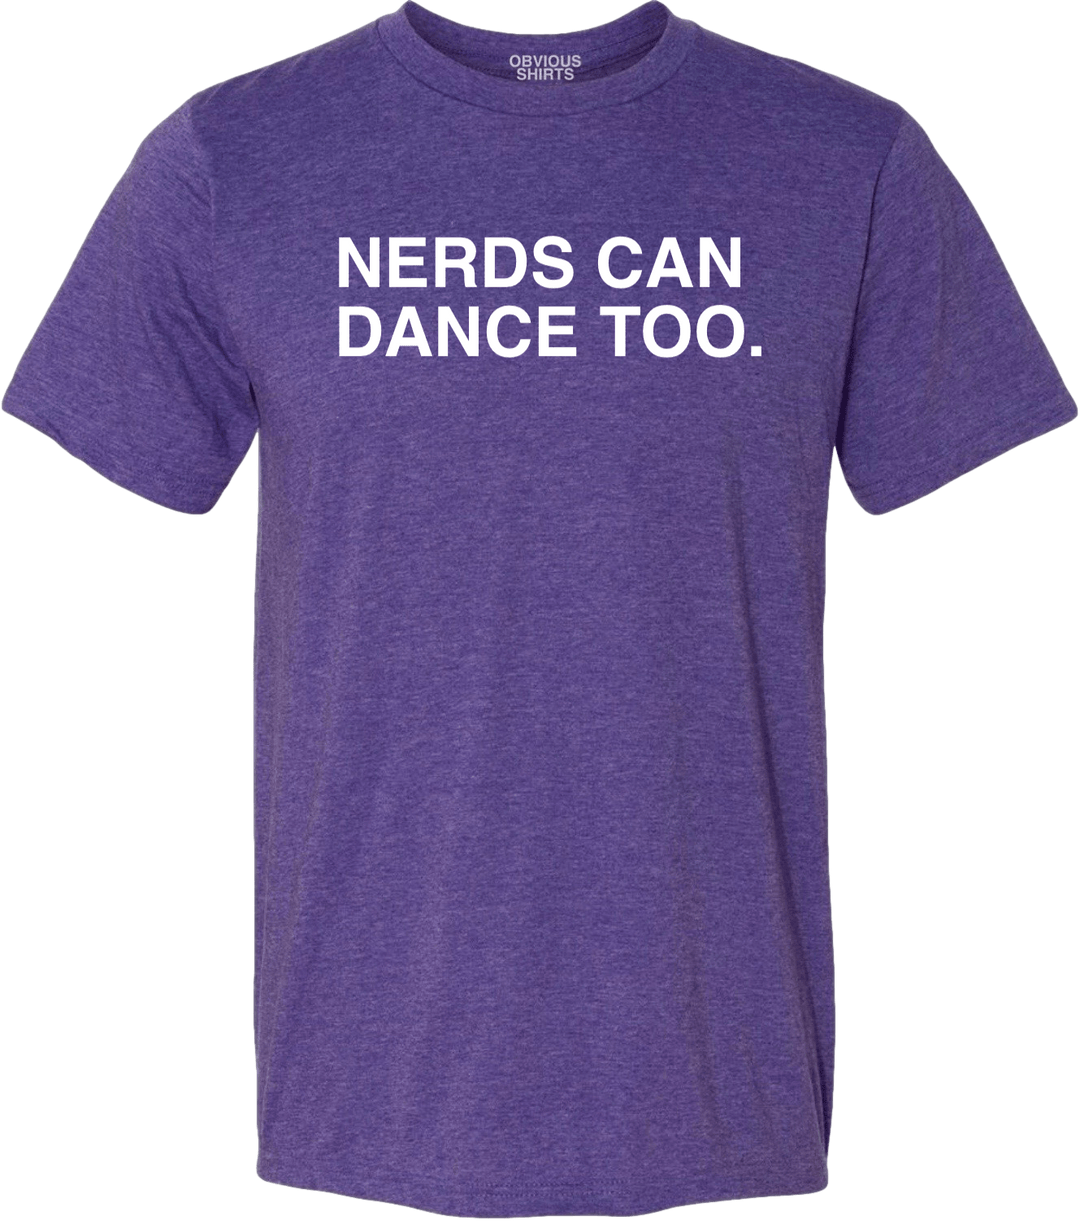 NERDS CAN DANCE TOO. - OBVIOUS SHIRTS